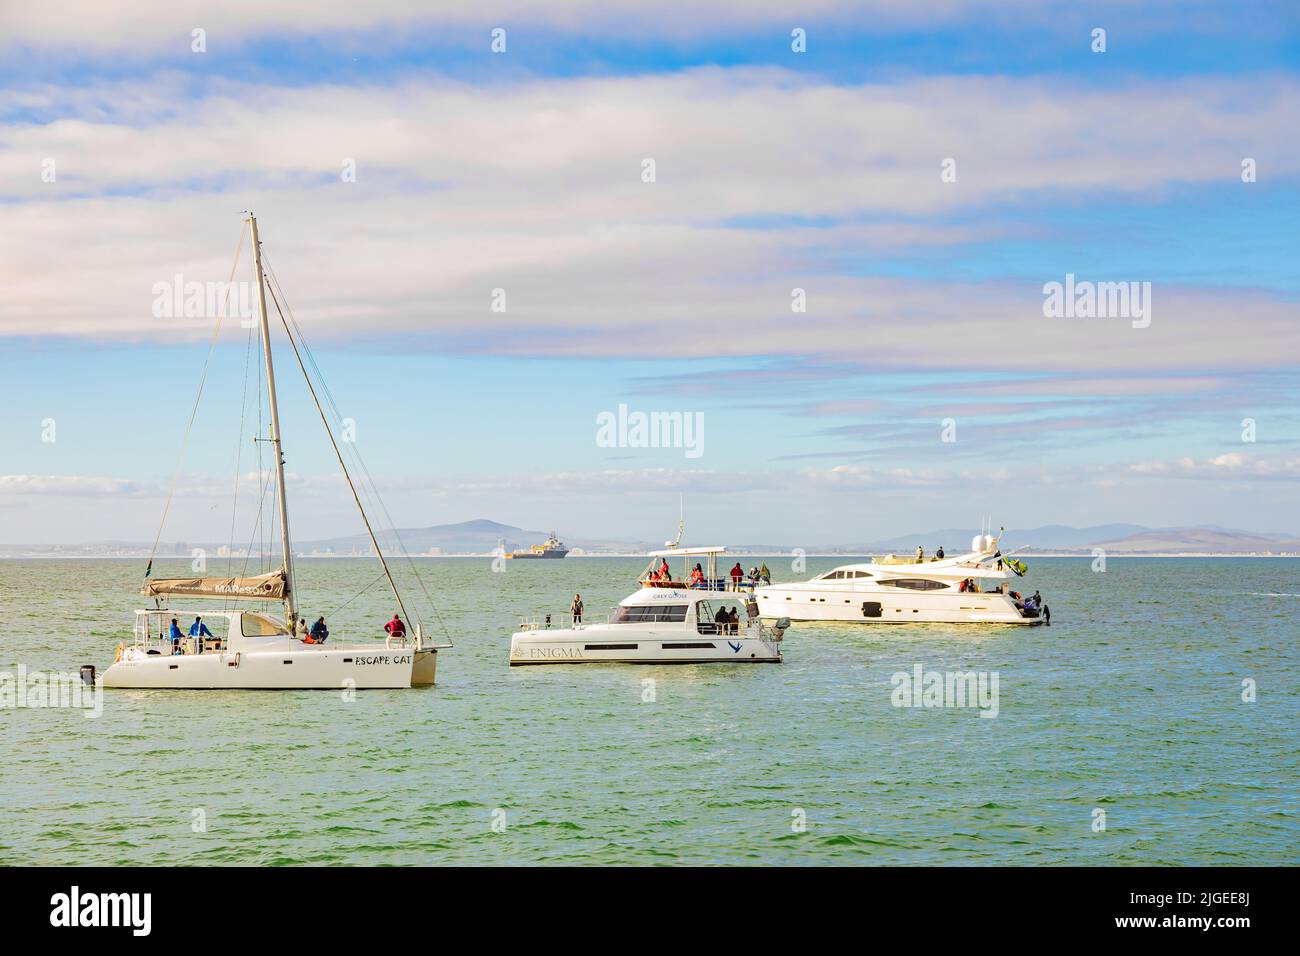 Cape Town, South Africa - May 12, 2022: Leisure boat on the water in Table Bay Stock Photo